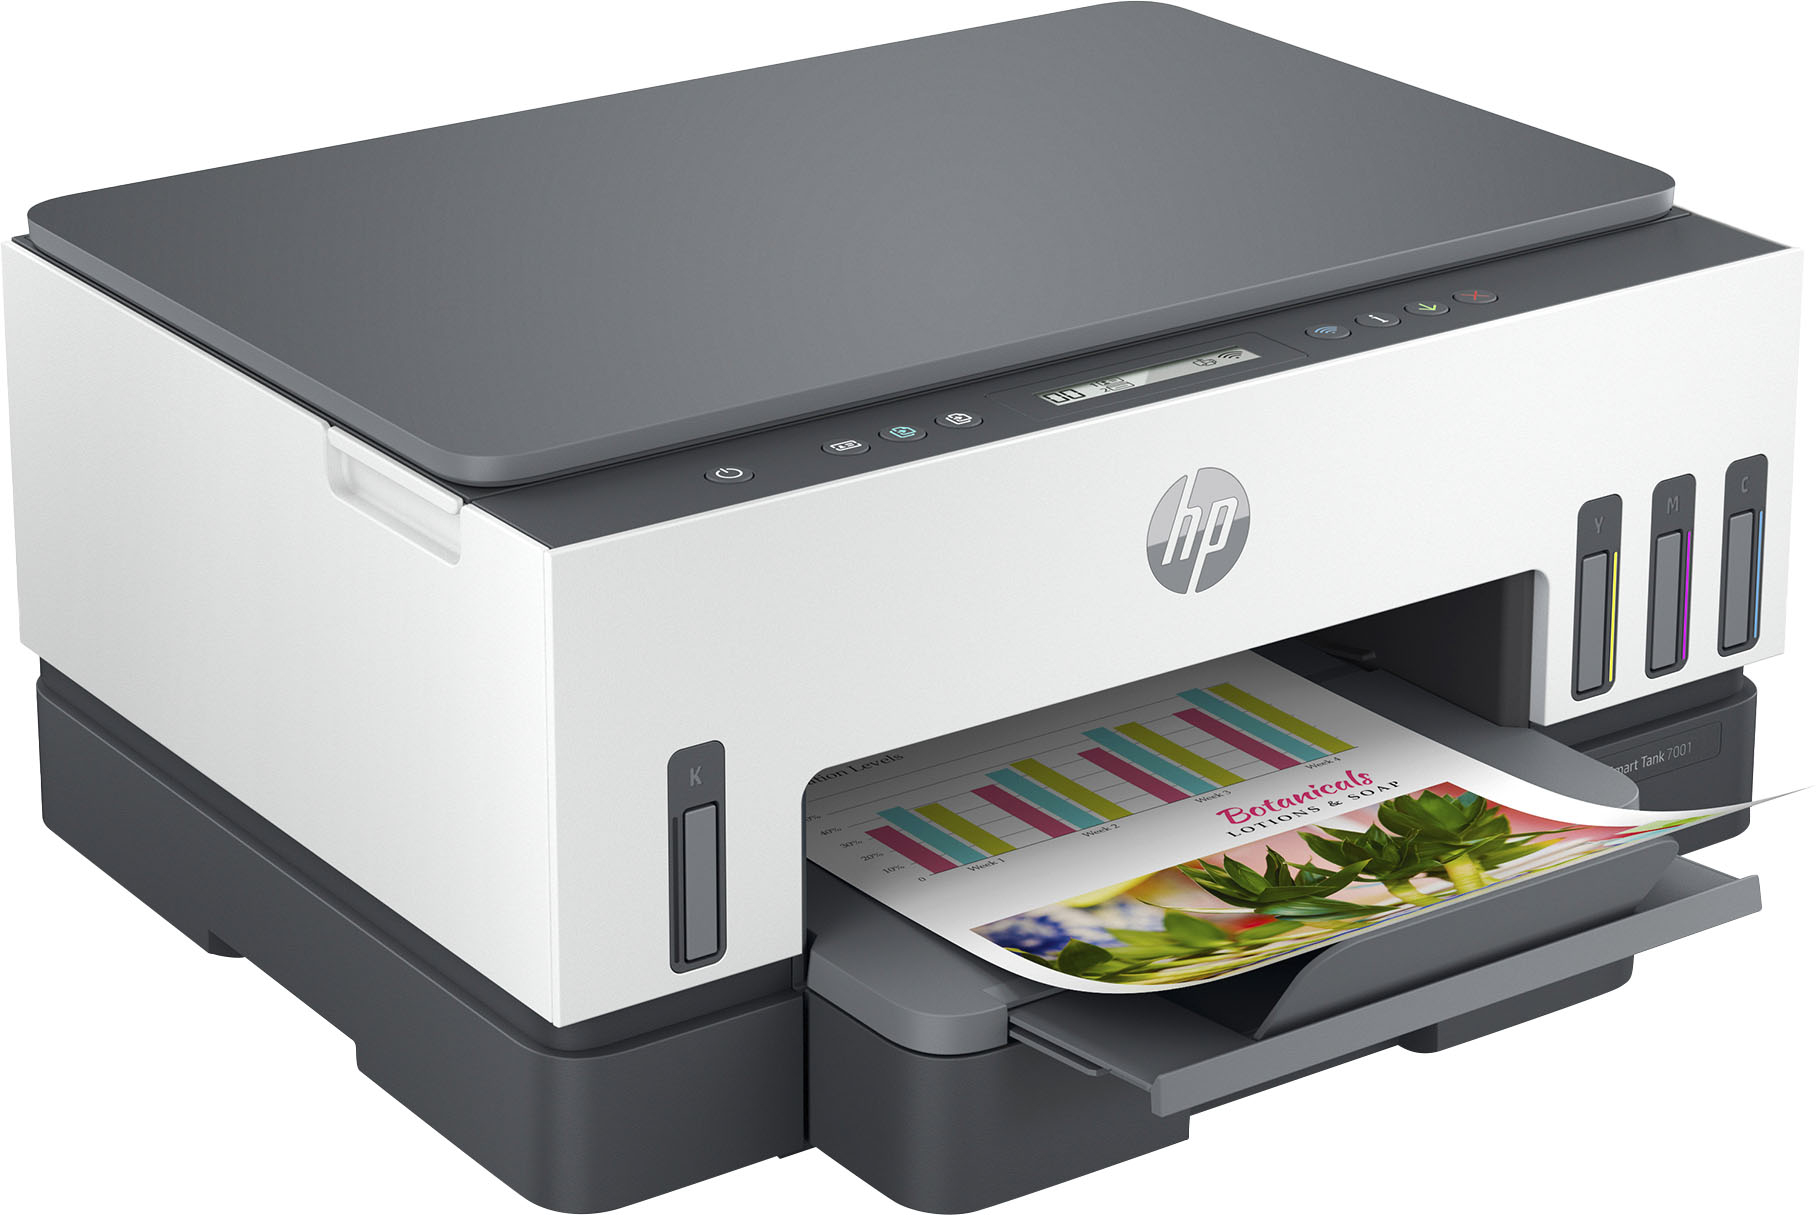 Angle View: HP - Smart Tank 7001 Wireless All-In-One Supertank Inkjet Printer with up to 2 Years of Ink Included - White & Slate